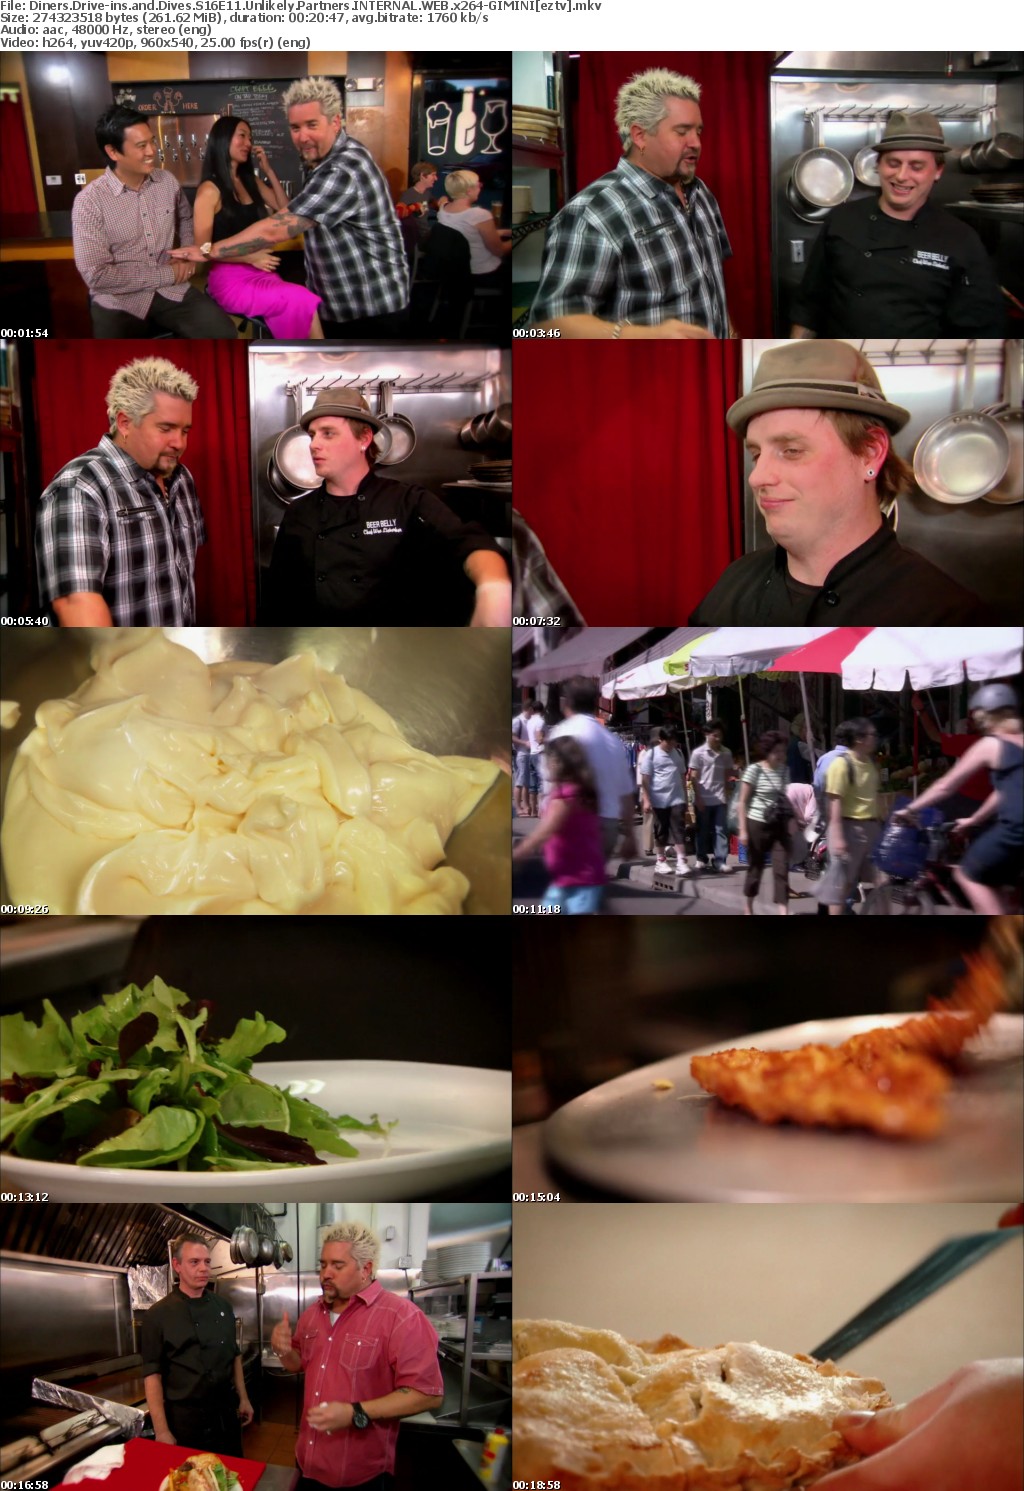 Diners Drive ins and Dives S16E11 Unlikely Partners INTERNAL WEB x264 GIMIN...